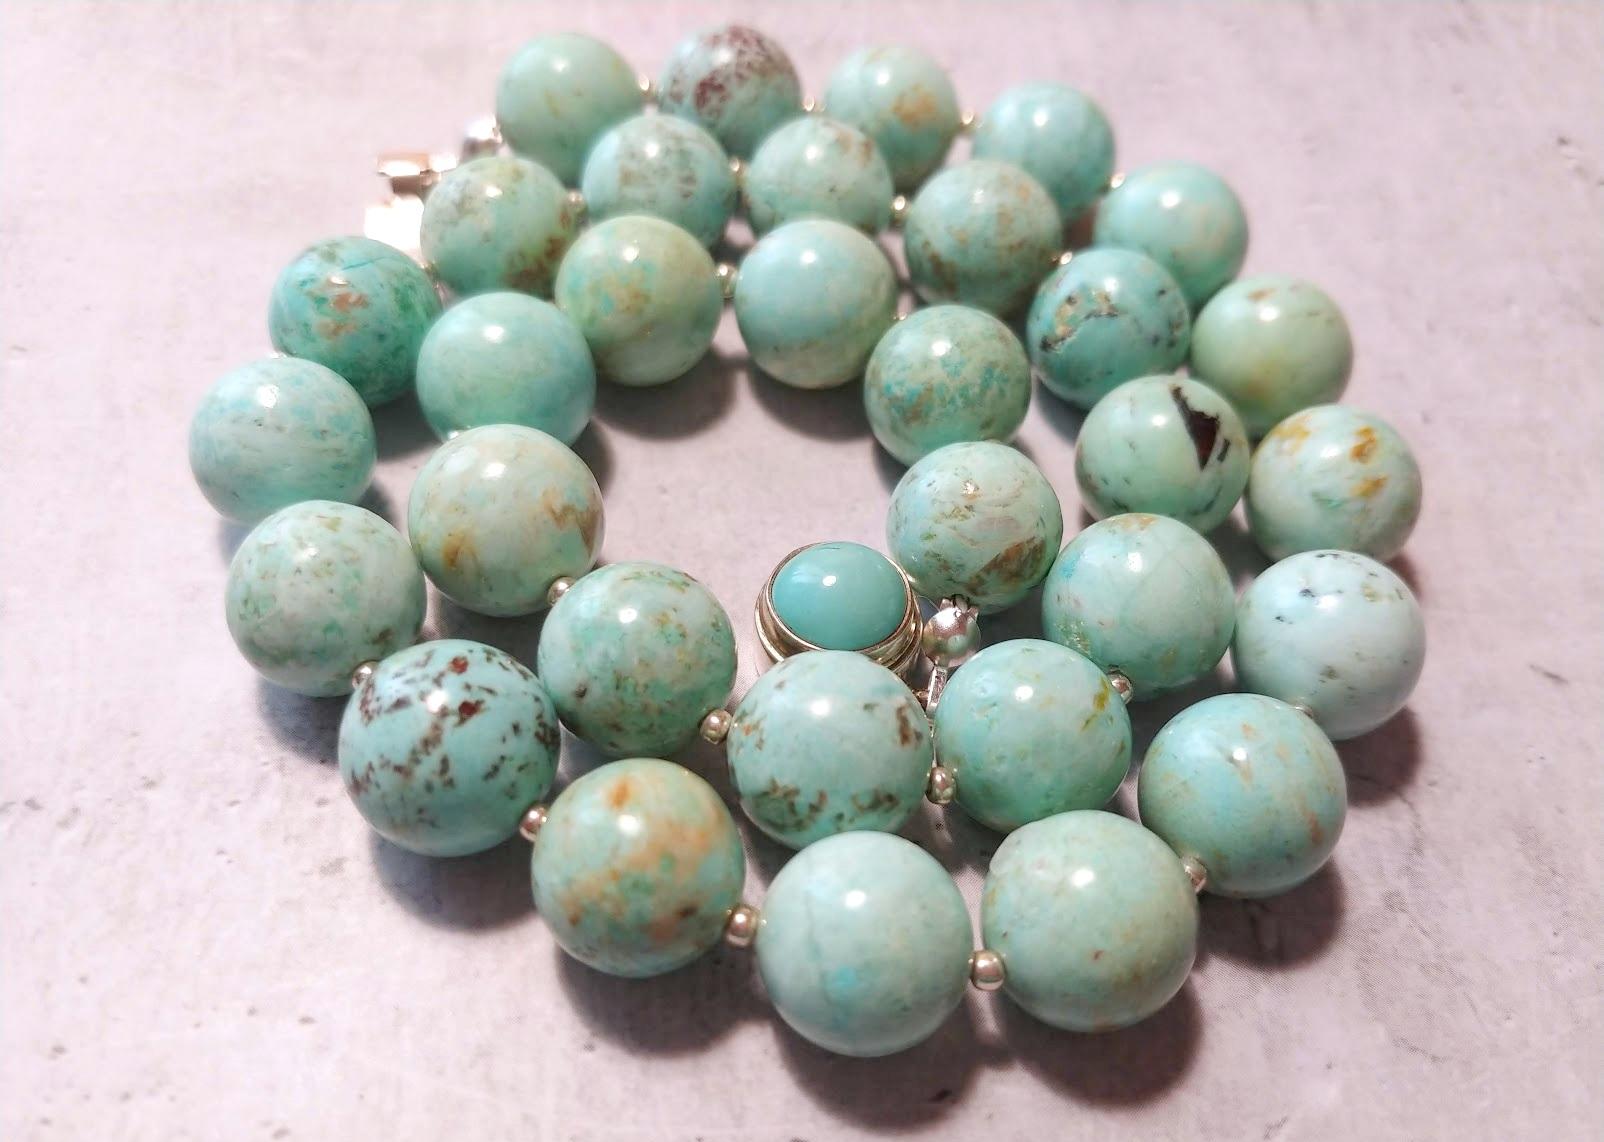 The length of the necklace is 18 inches (45.7 cm). The size of the smooth round beads is 12 mm.
The beads' color is a light sky blue, delight aquamarine with delicate veining, Swainson's thrush eggs, and robin's egg blue. In bright sunlight, the